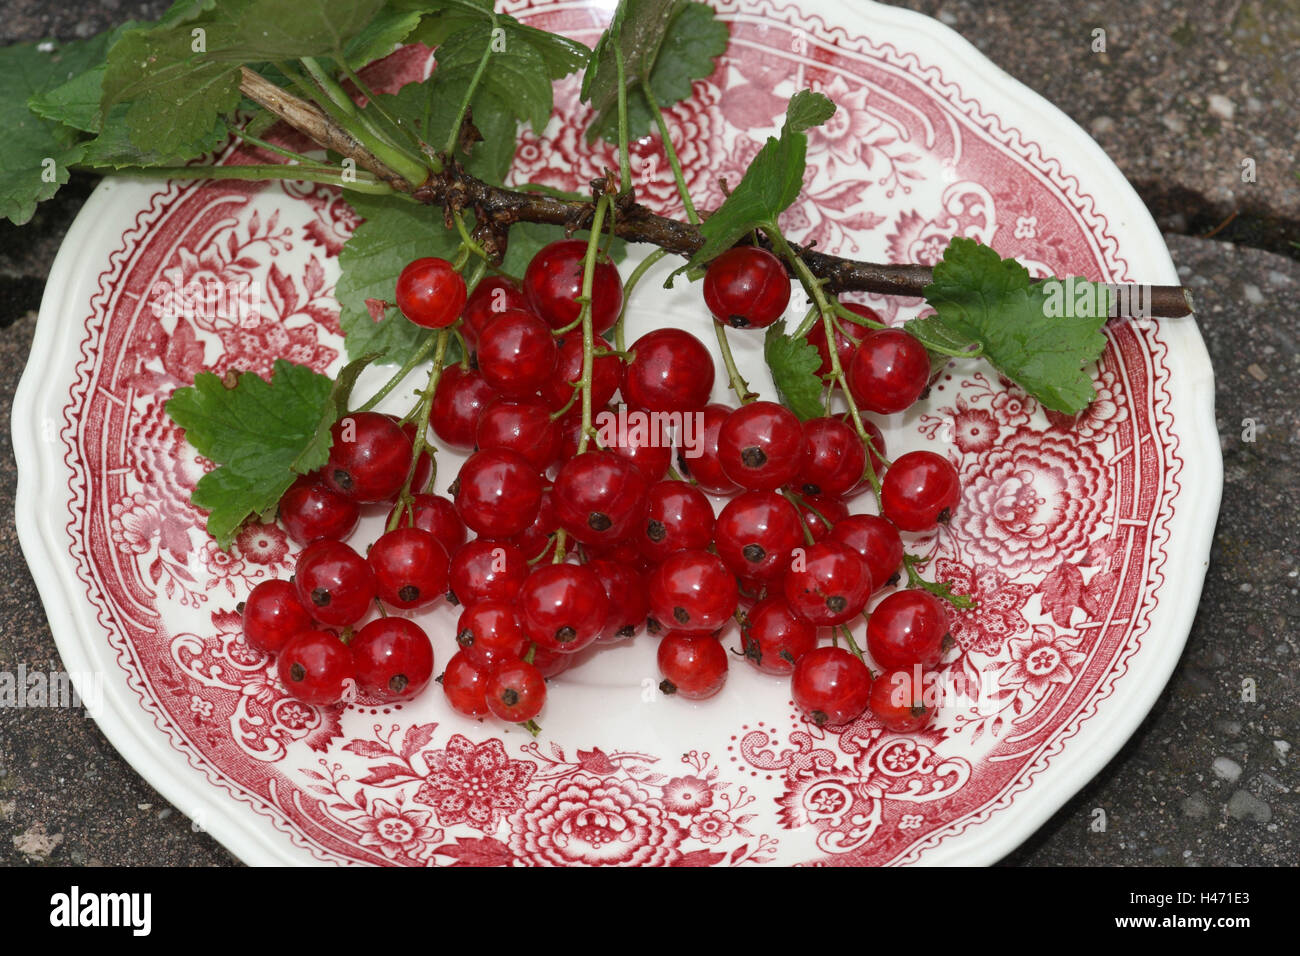 Red currants on a plate, Stock Photo